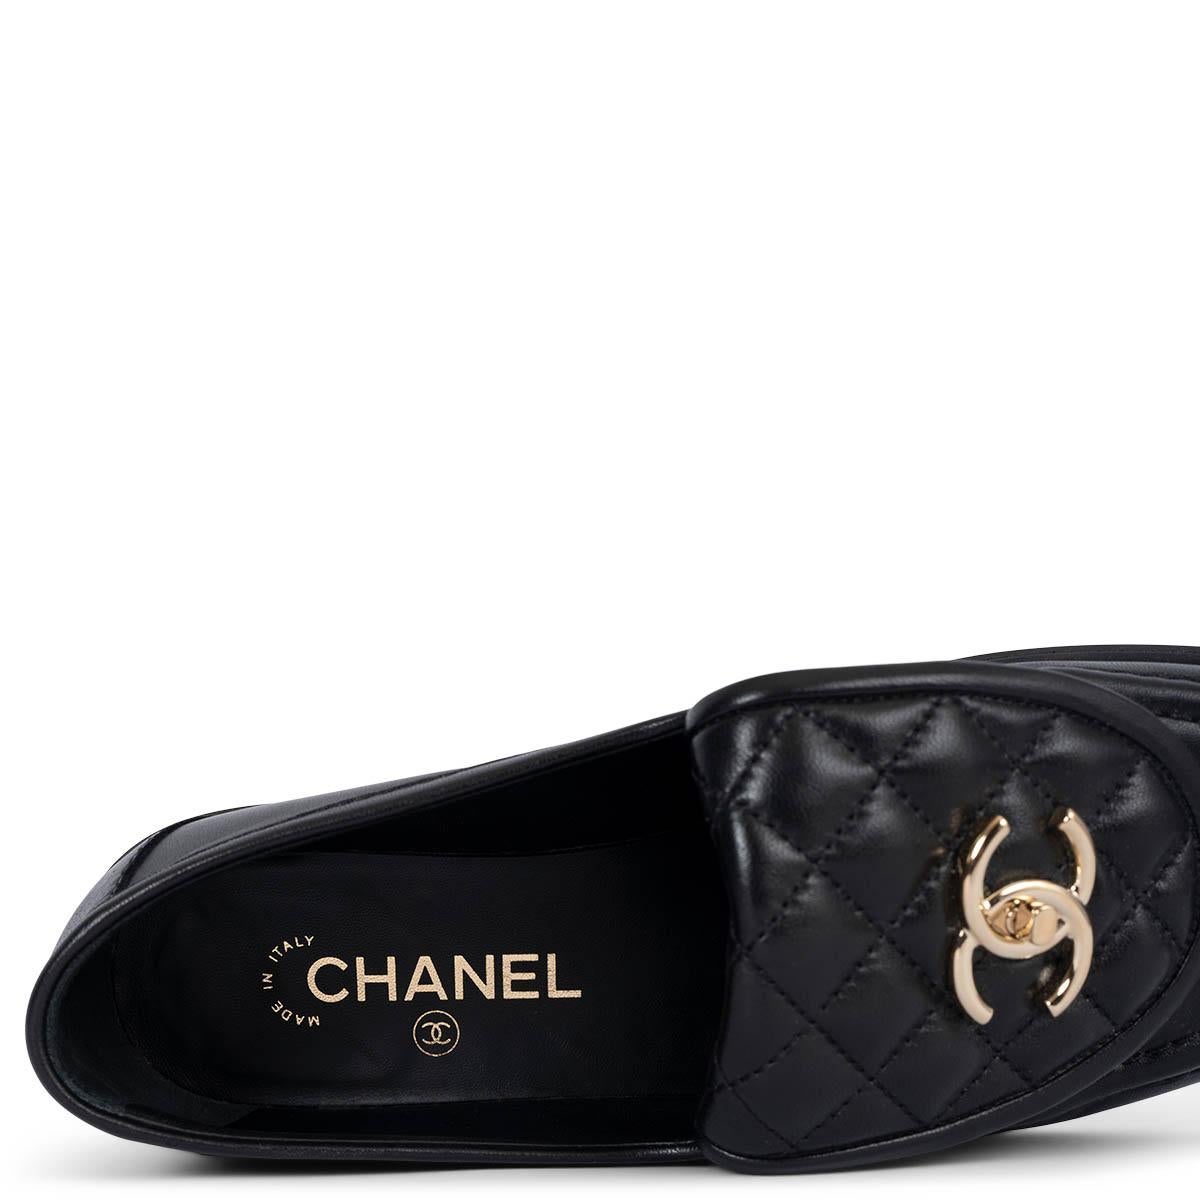 CHANEL black leather REV TURNLOCK Loafers Shoes 39 For Sale 3